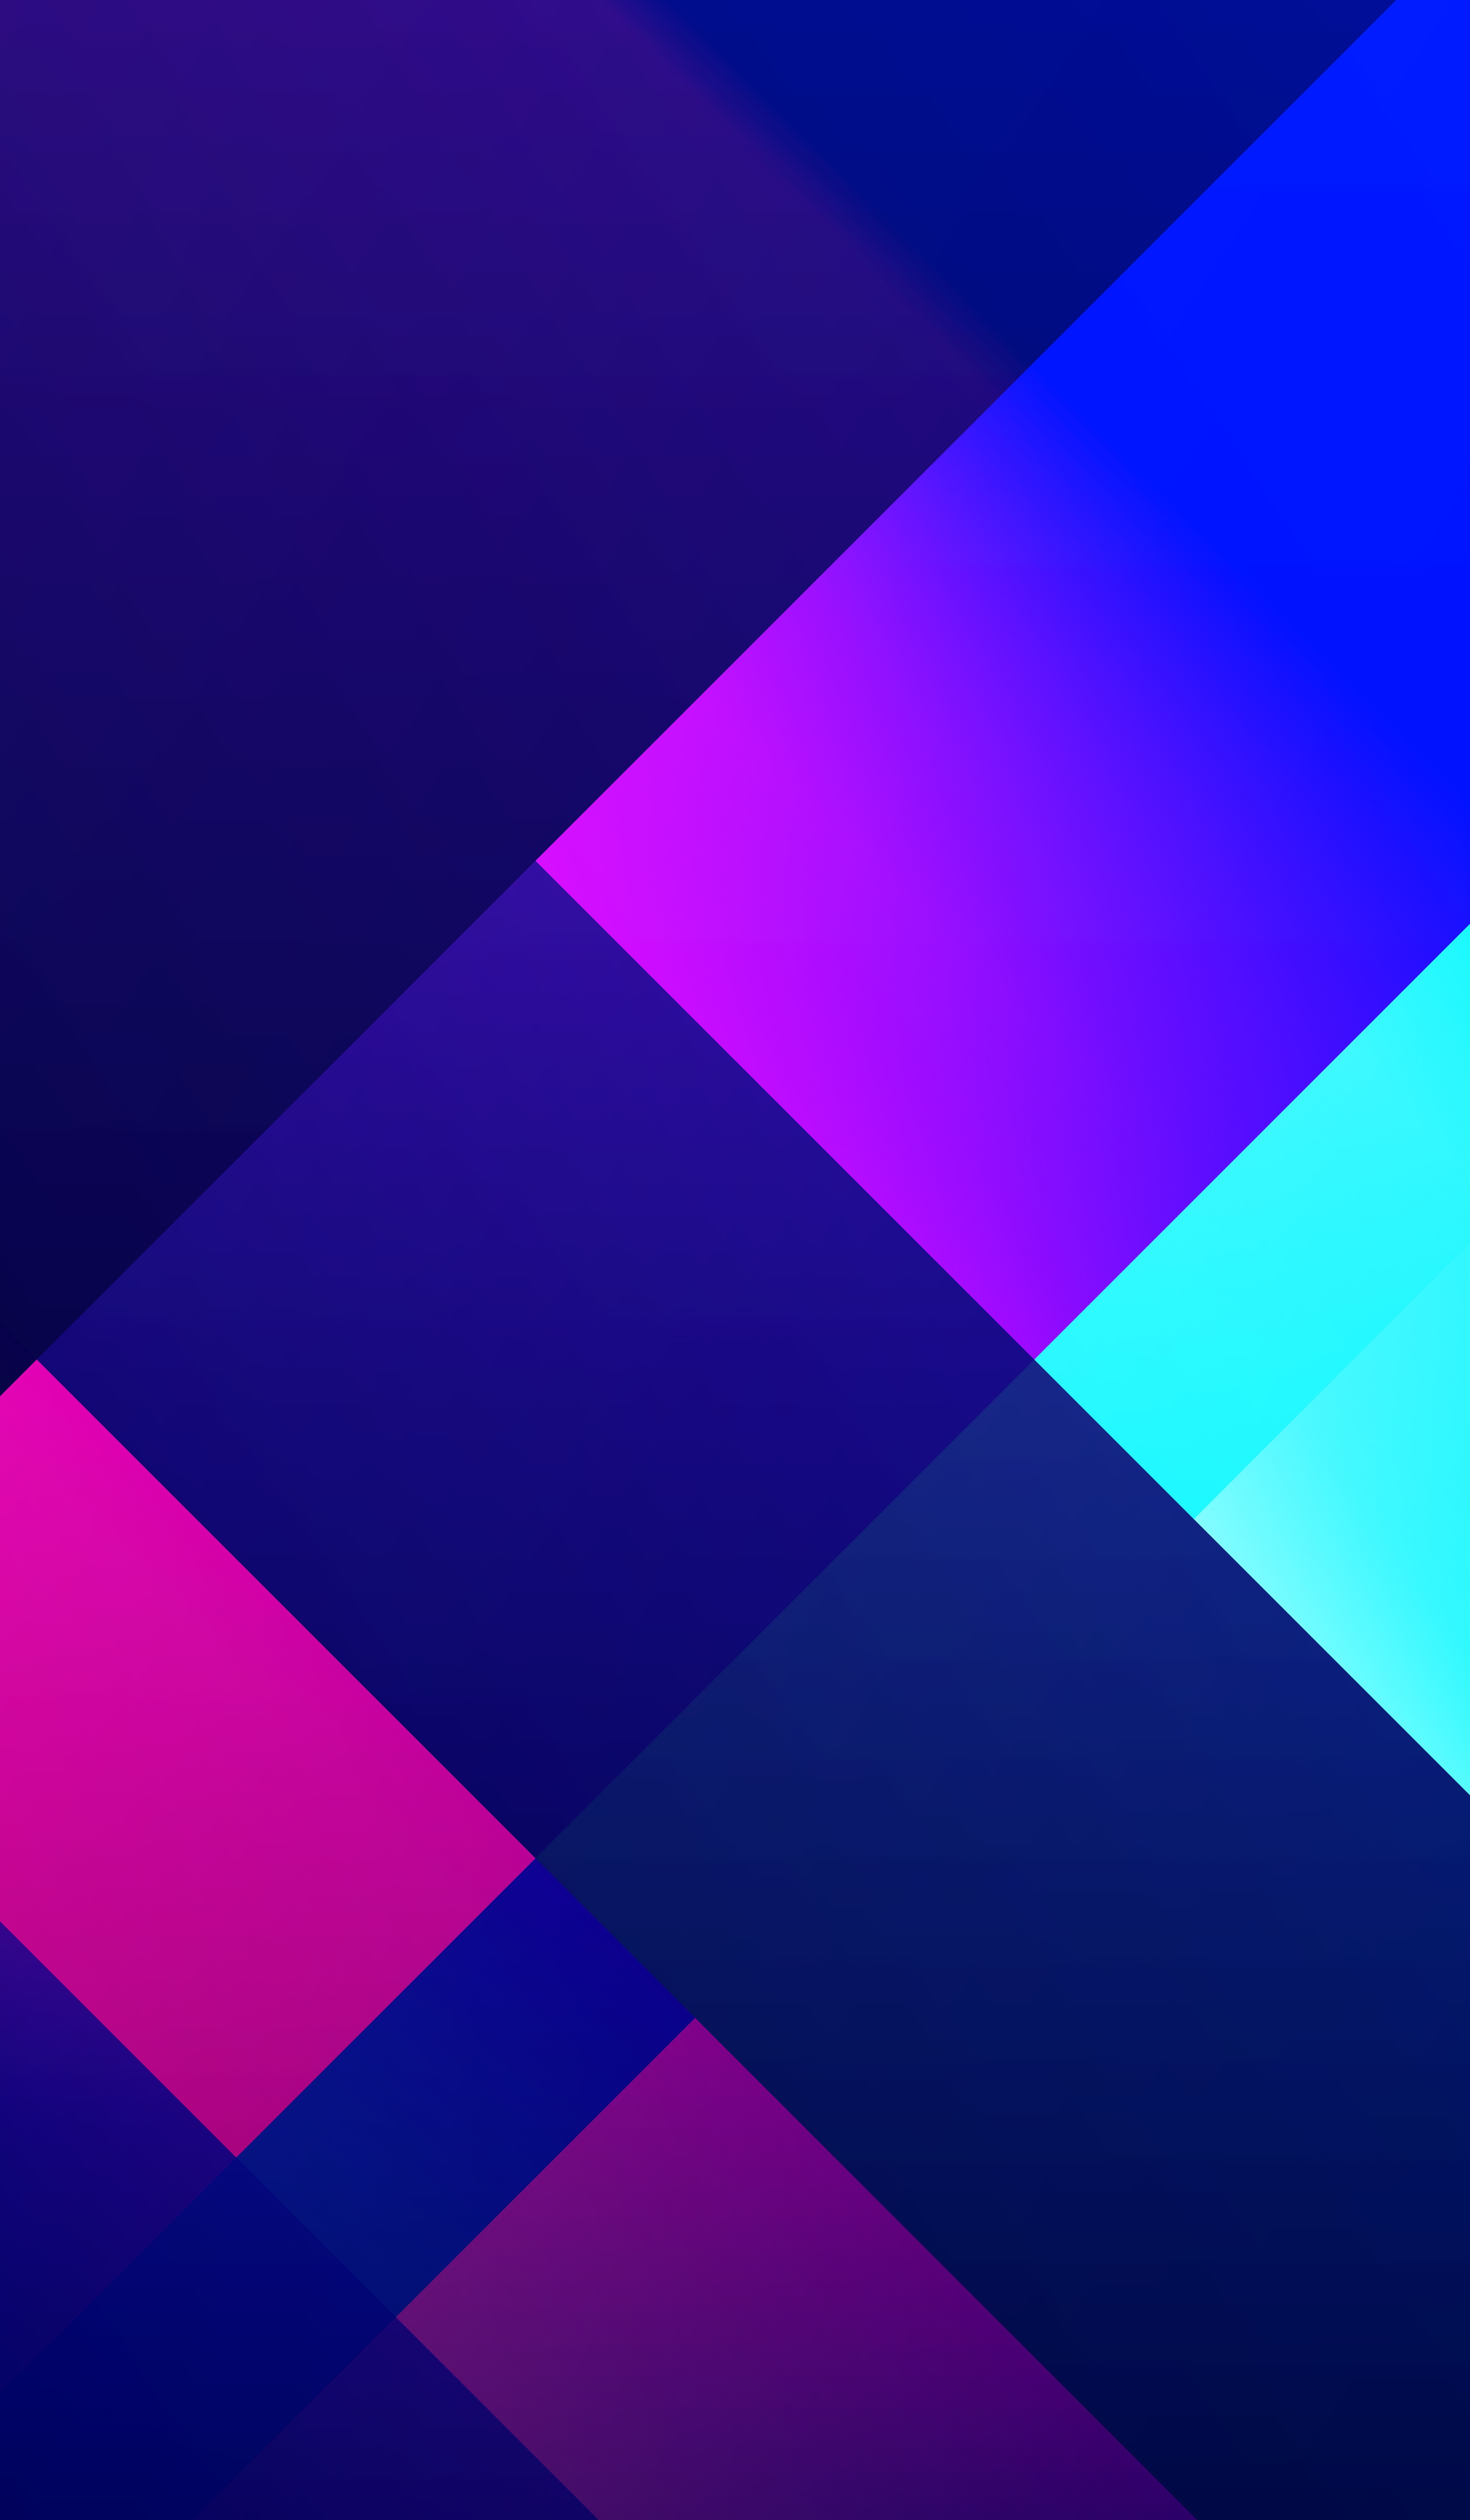 motley, geometry, gradient, abstract, multicolored Free Stock Photo